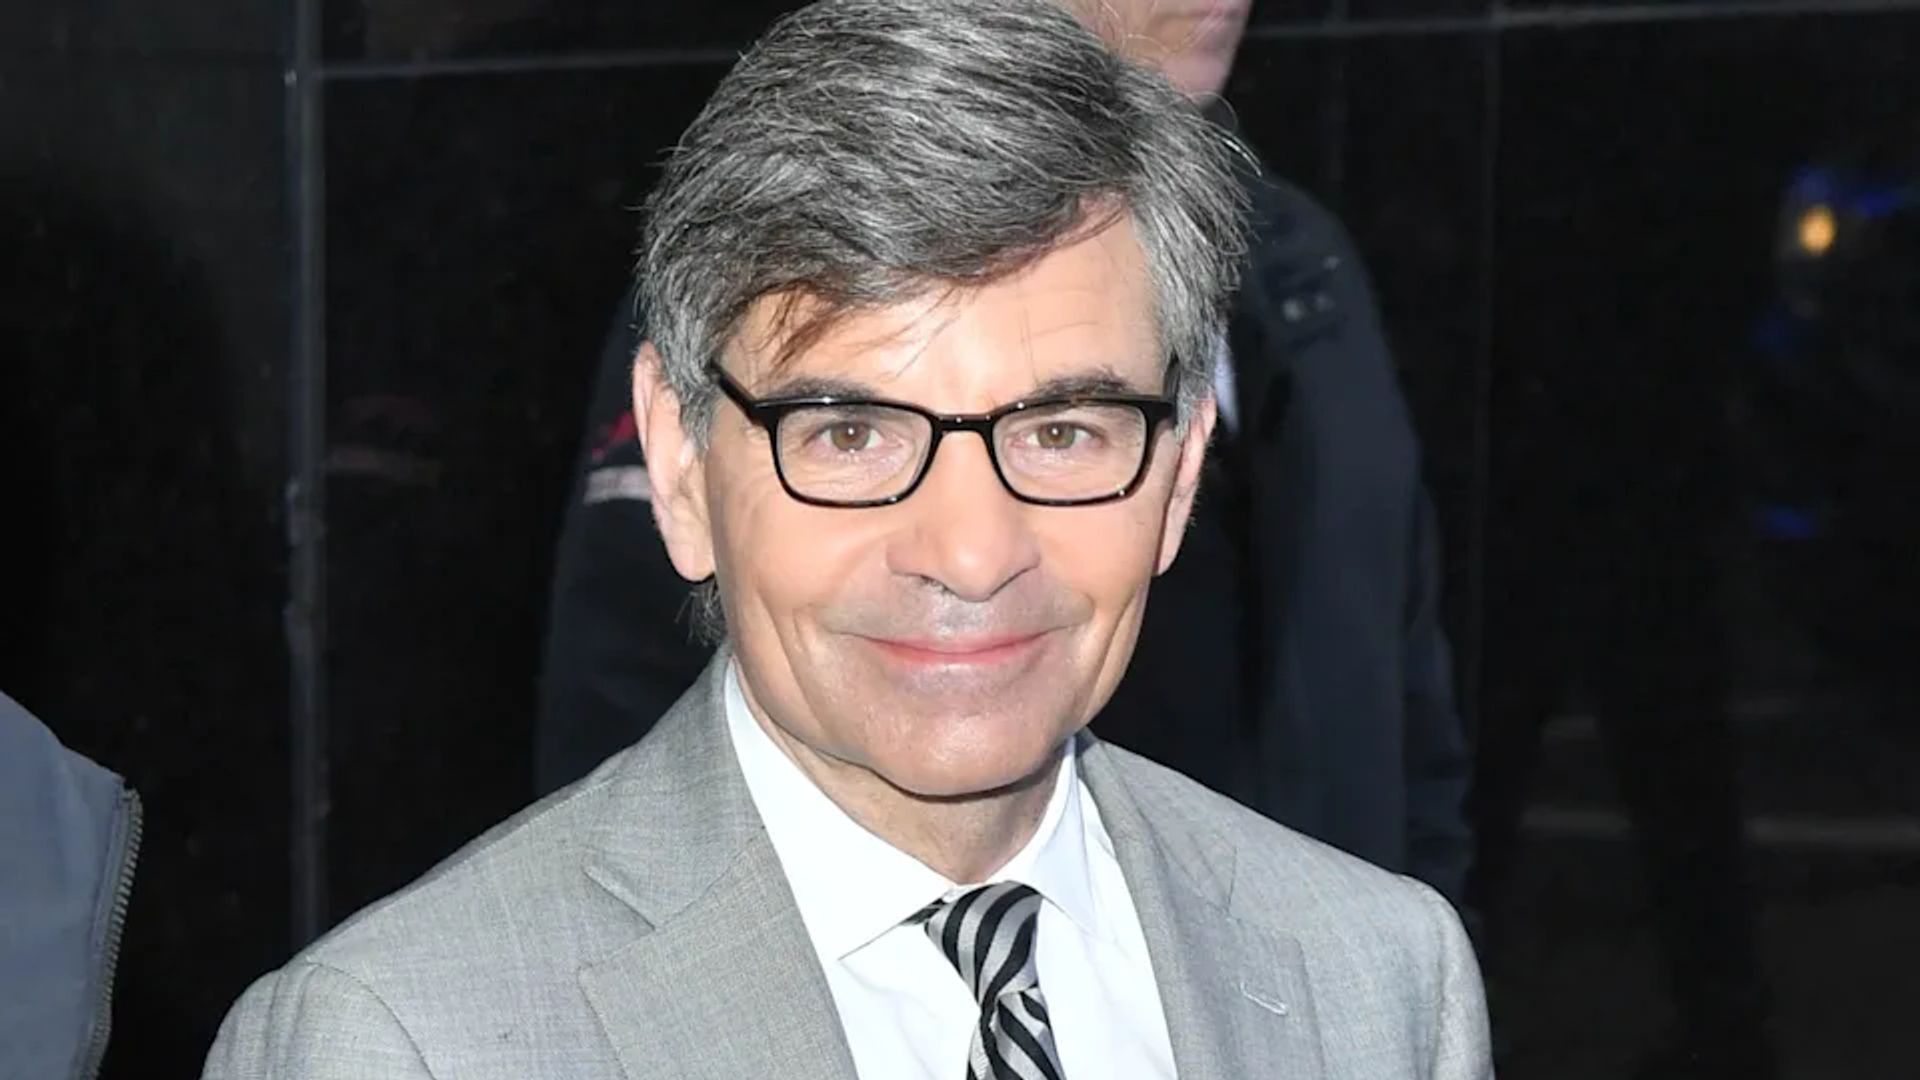 GMA's George Stephanopoulos reveals how things are going since T.J.Holmes and Amy Robach’s exit